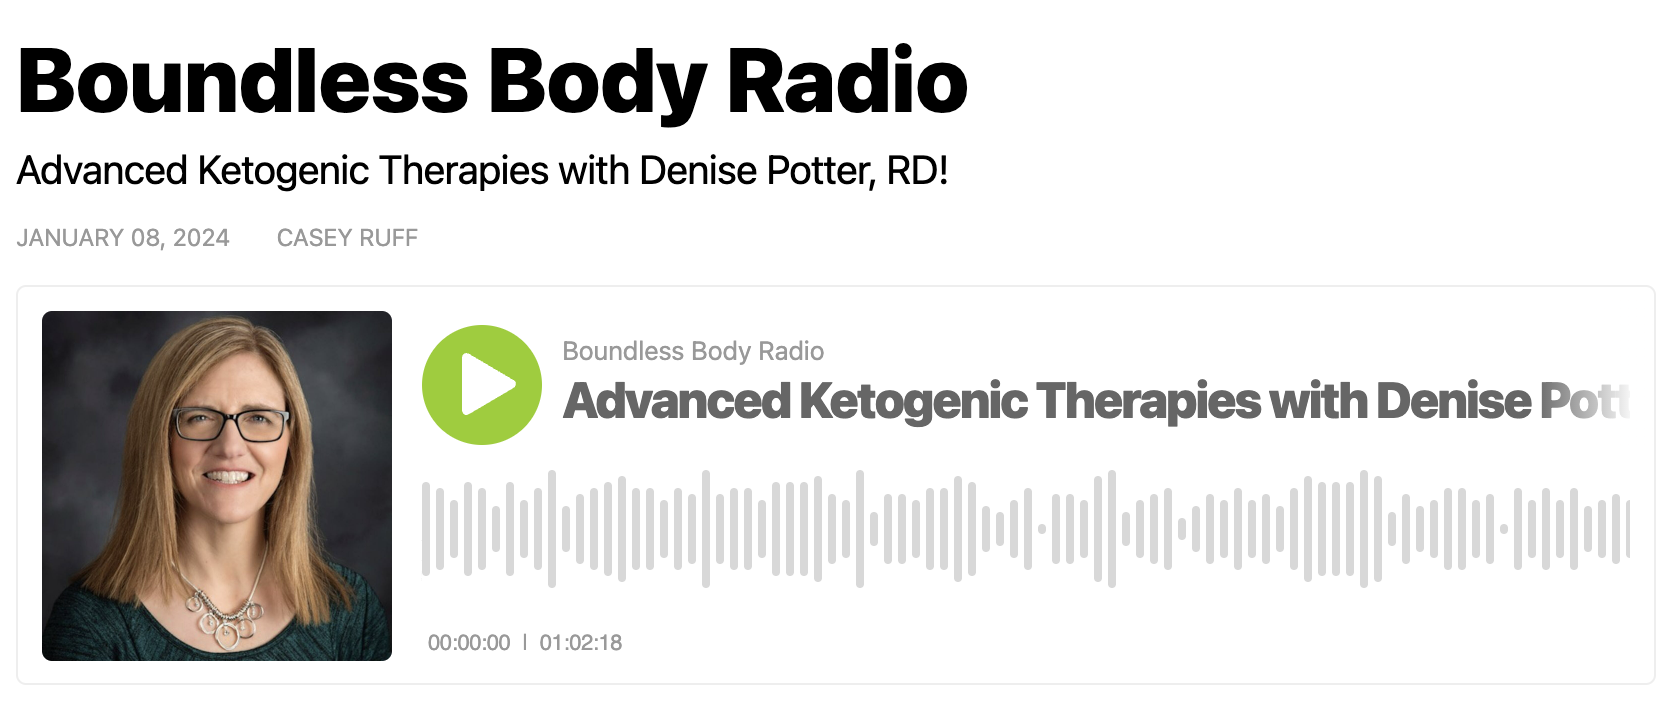 Advanced Ketogenic Therapies with Denise Potter, RD! - Boundless Body Radio